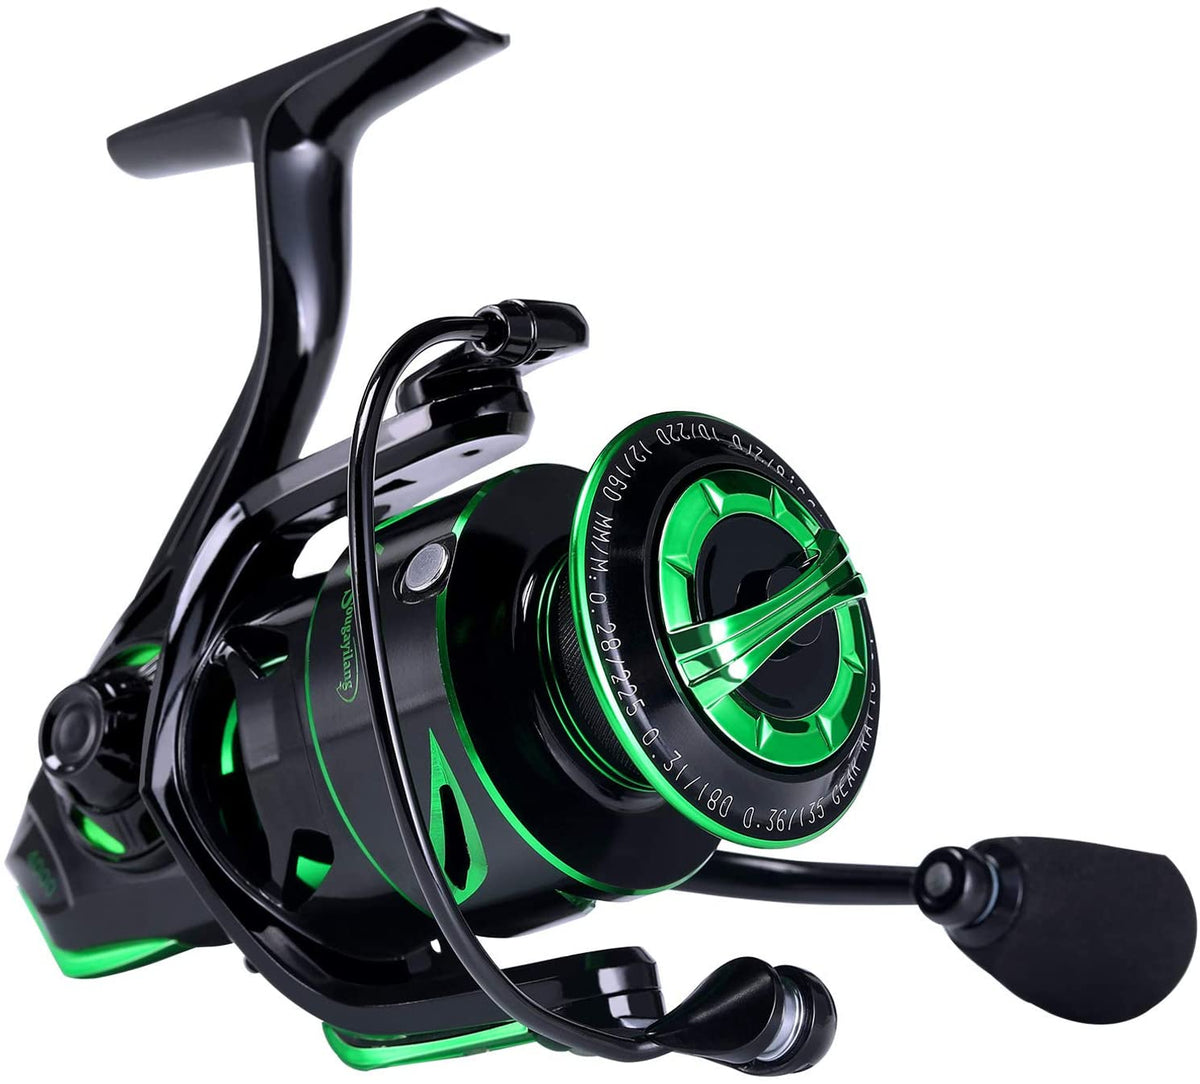 Sougayilang Spinning Fishing Reel Light Weight 6.2:1 High-Speed Gear Ratio  with 12+1 Stainless BB and CNC Aluminum Spool for Freshwater and Saltwater